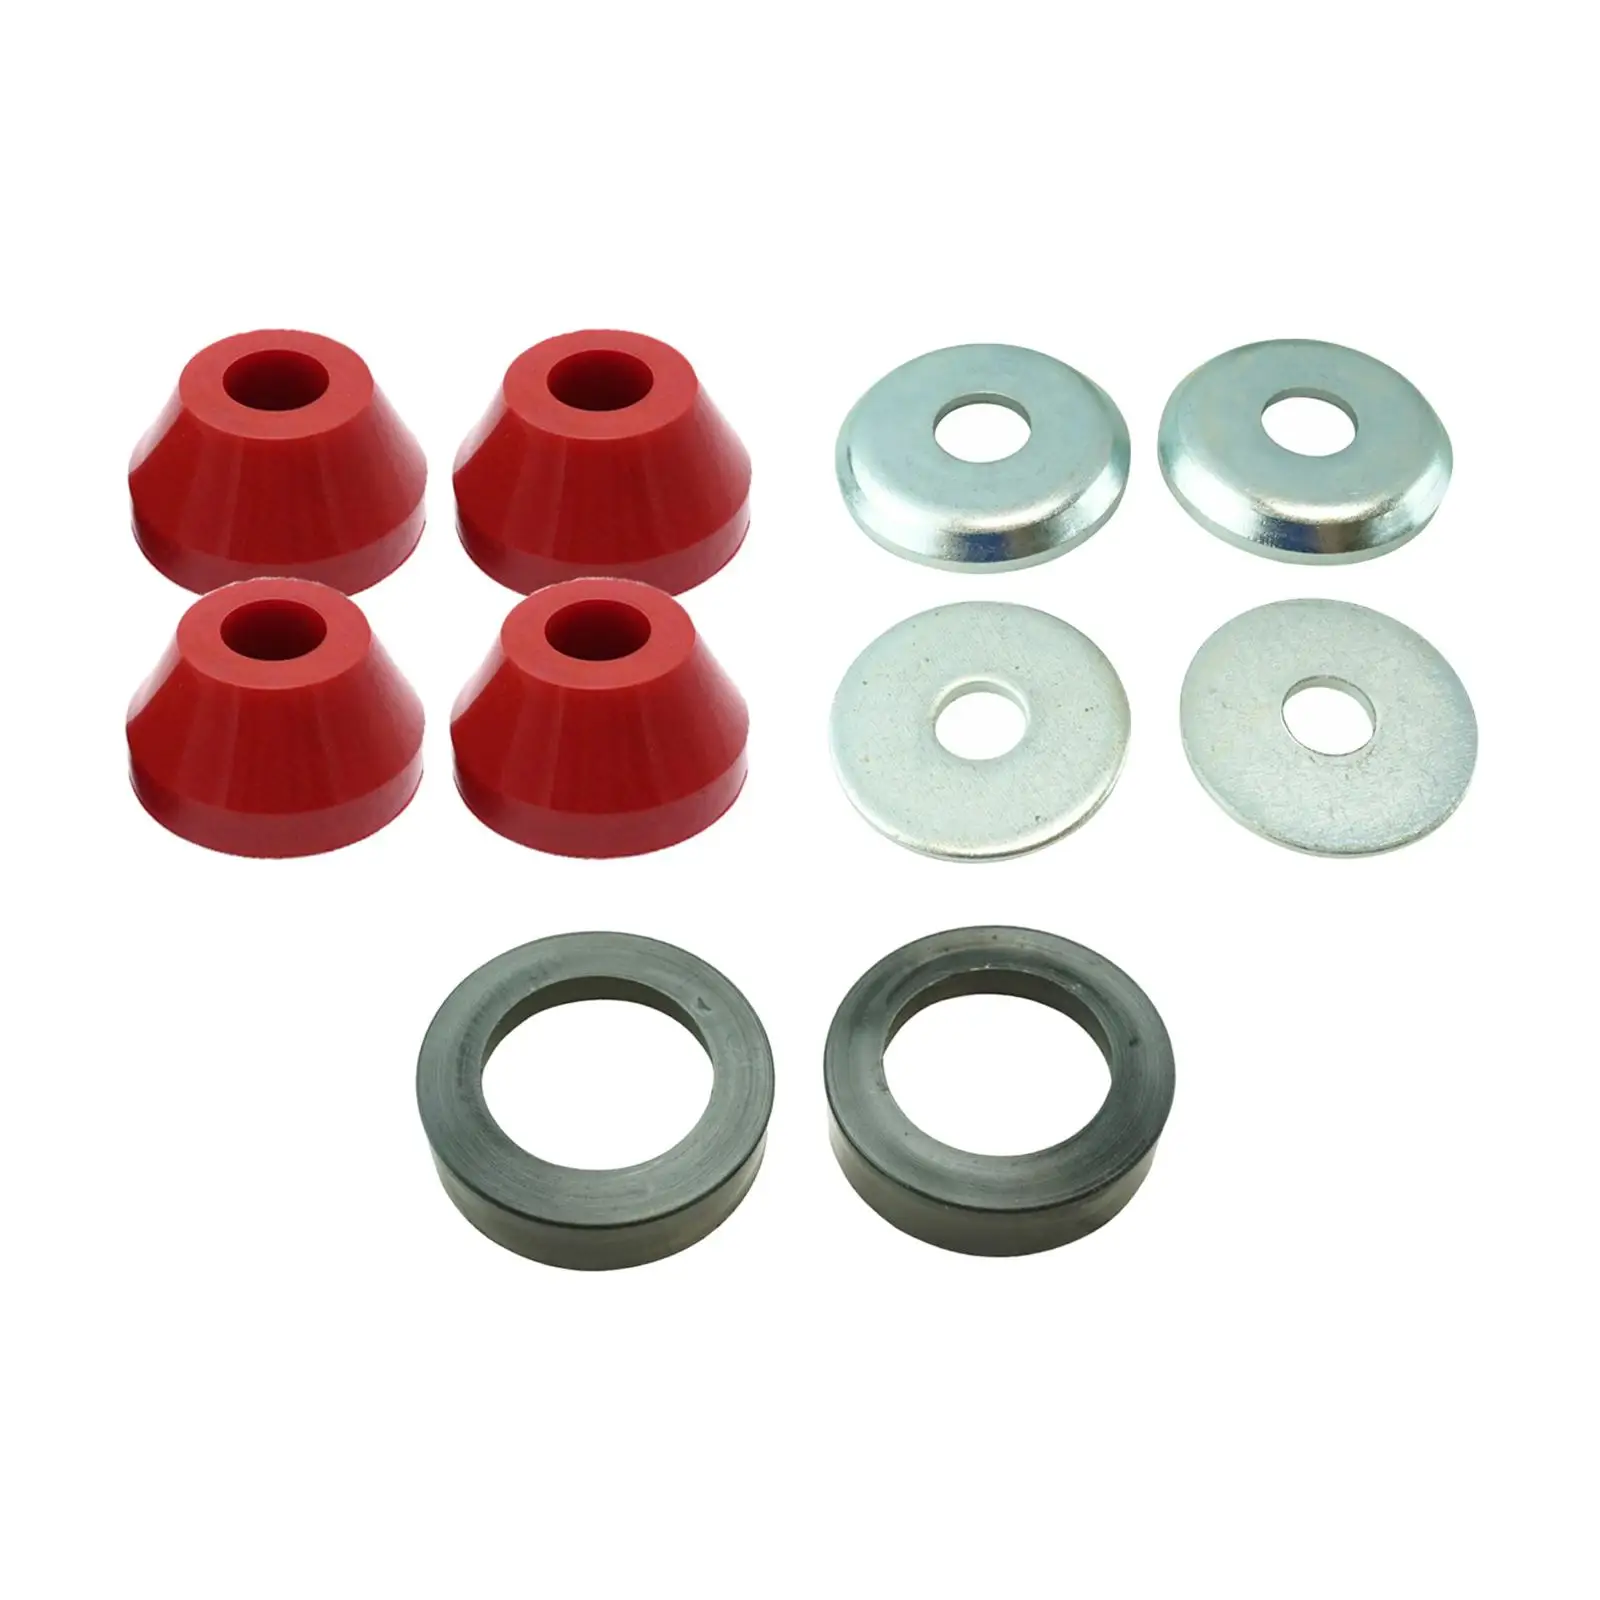 Radius Arm Bushing Parts Easy to Install Professional Accessories Replaces for